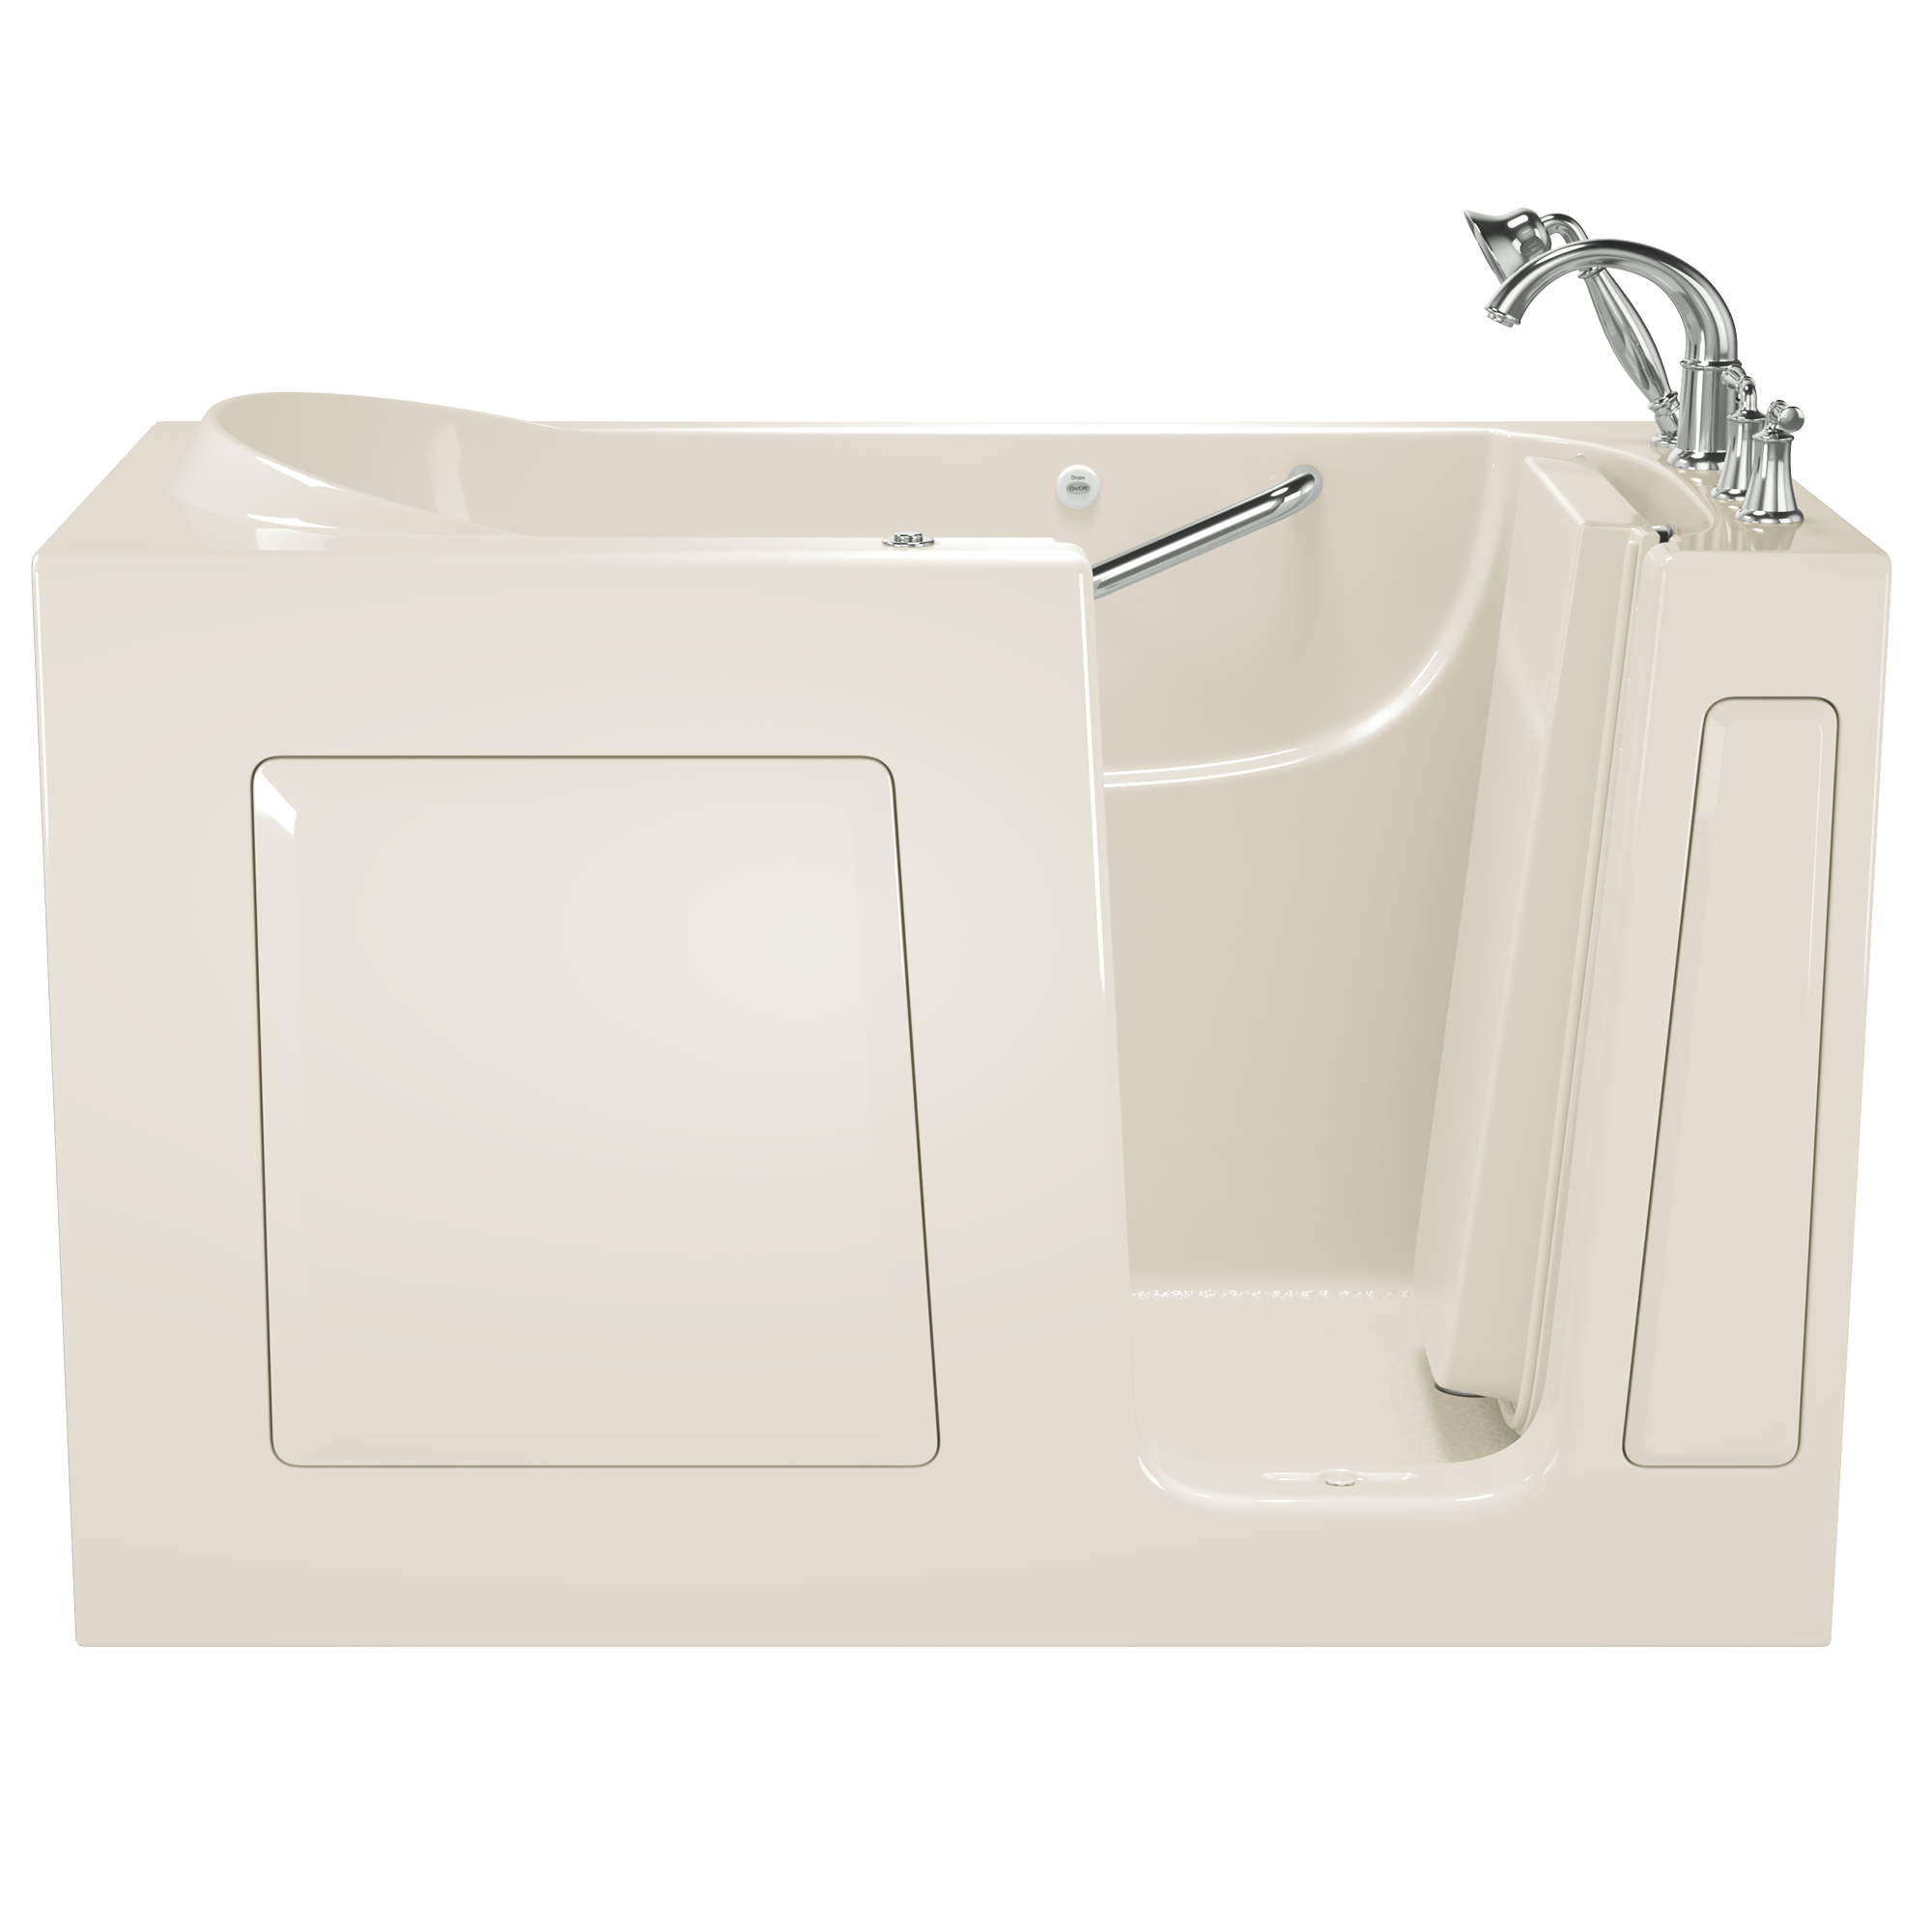 Gelcoat Value Series 60x30 Inch Walk In Bathtub with Whirlpool Massage System   Right Hand Door and Drain WIB LINEN